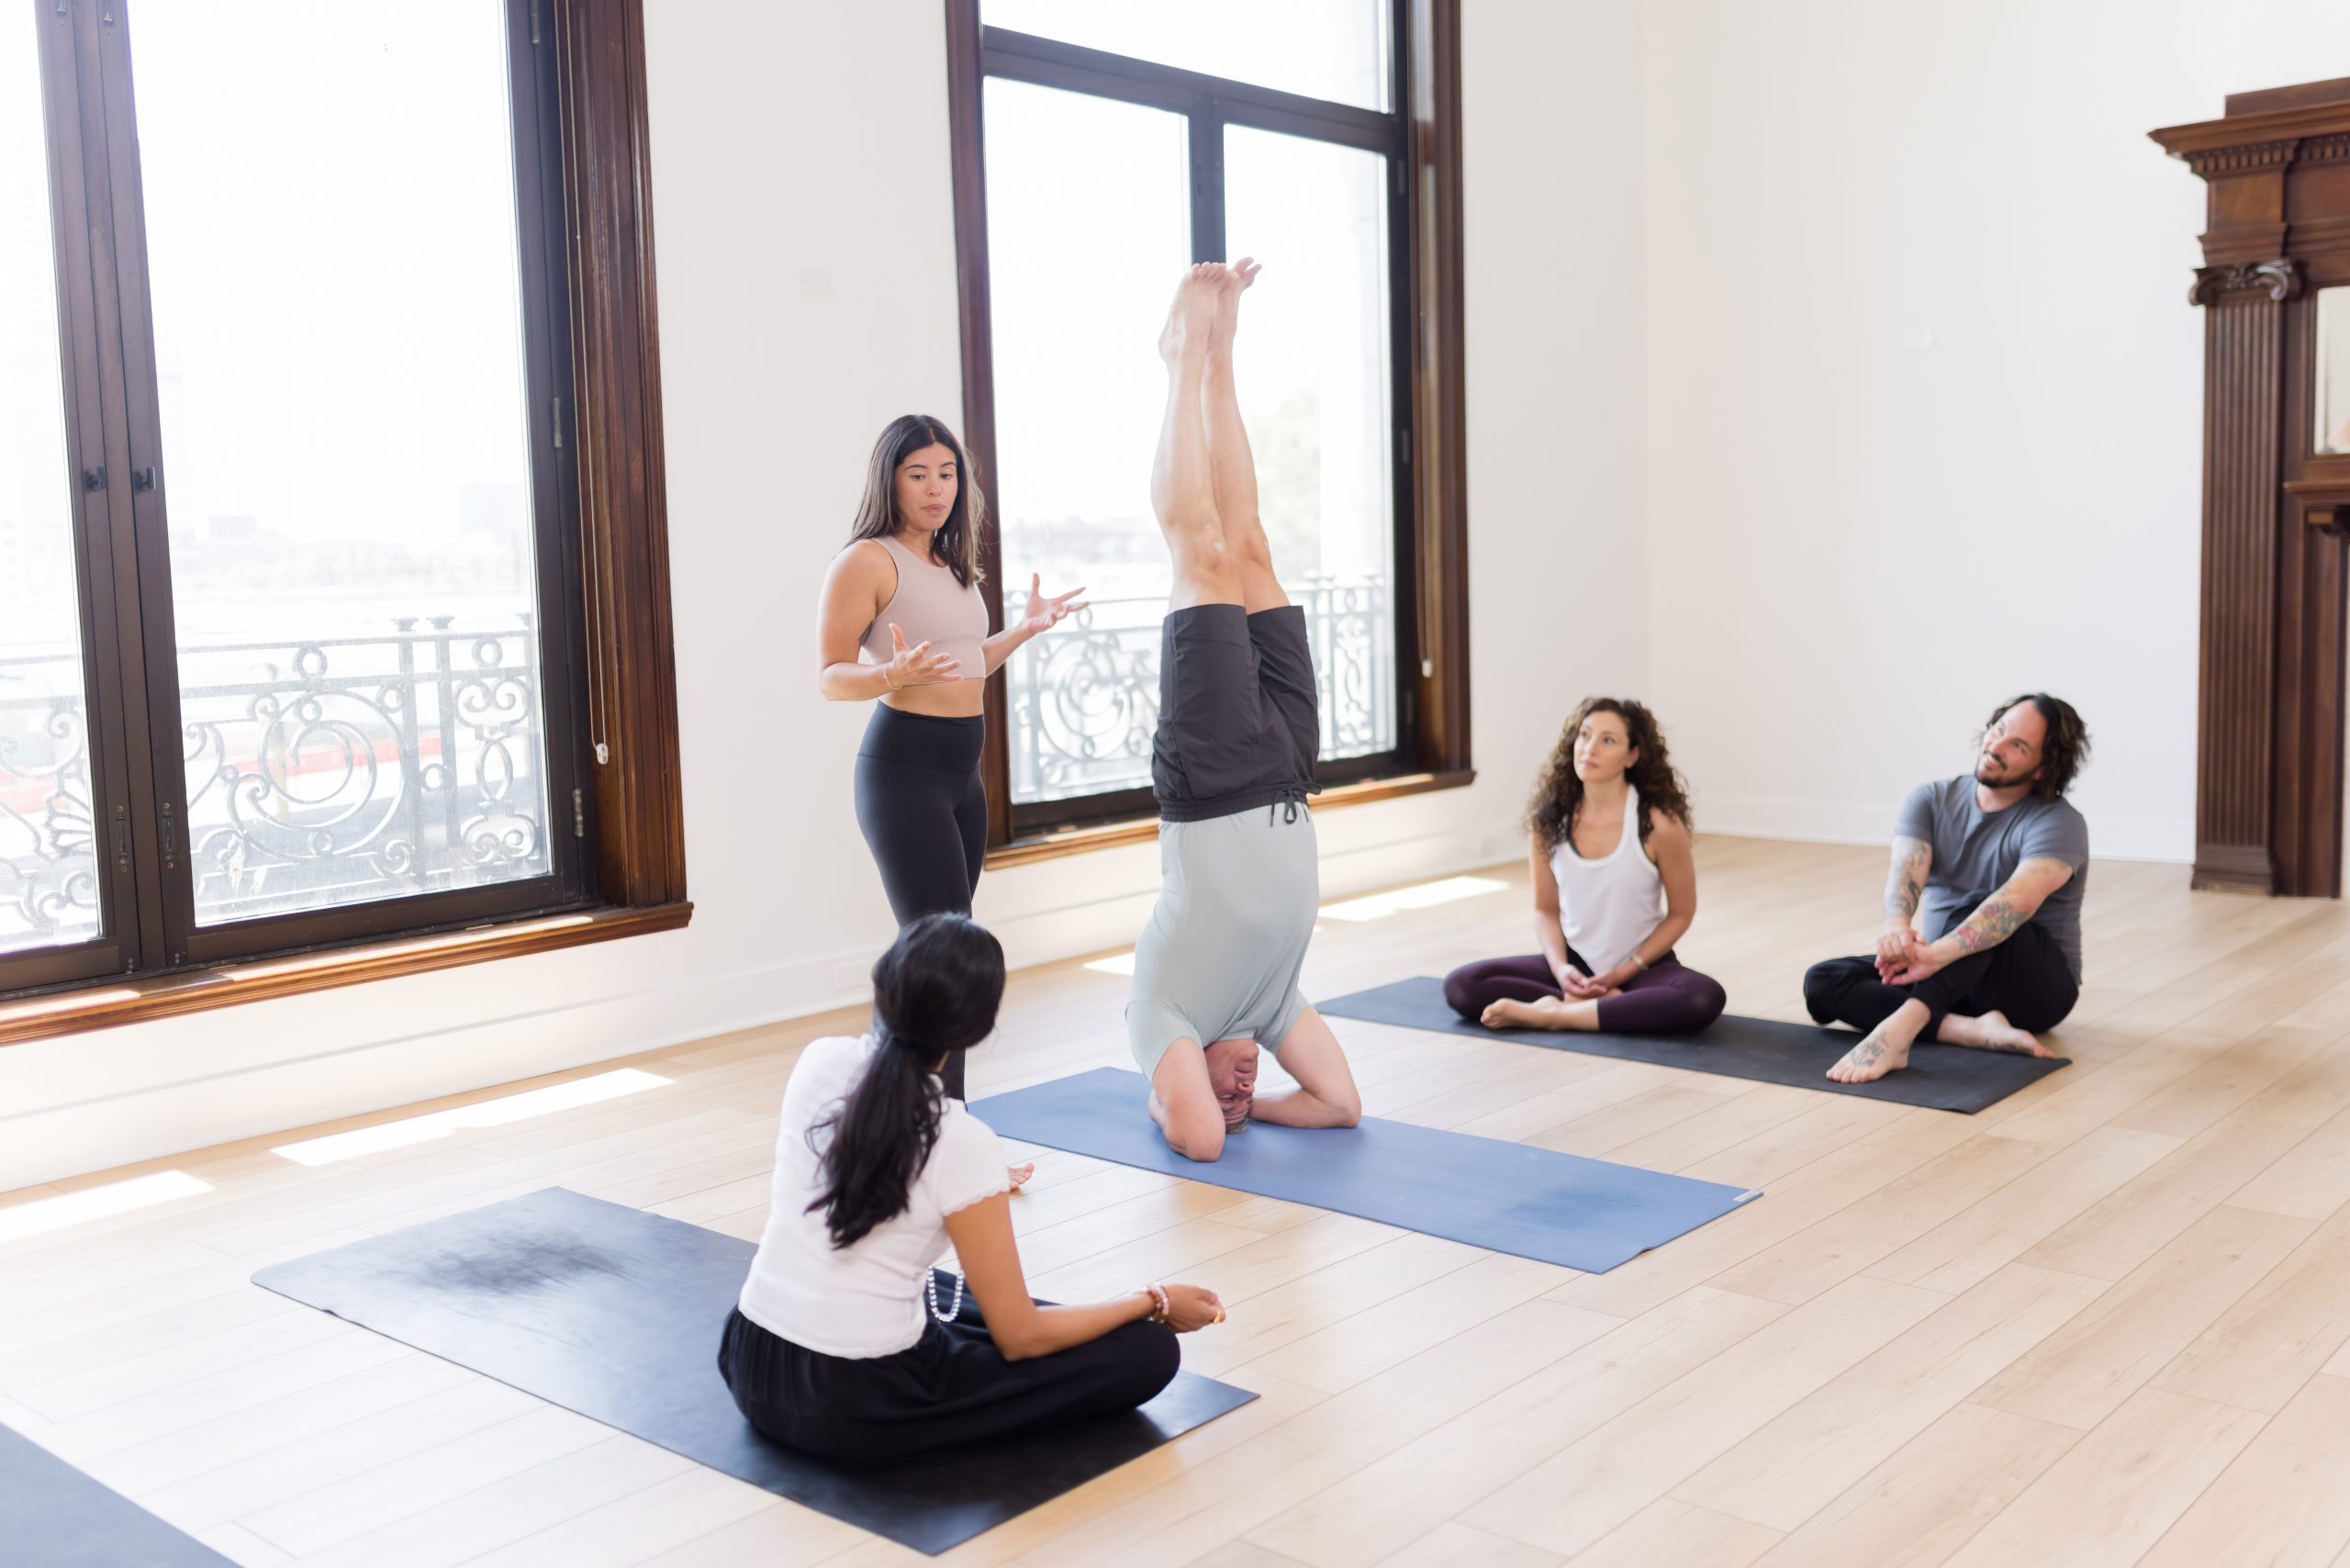 Melanie, a YogaRenew yoga teacher, standing in the front of a yoga class, instructing a young male to get up into headstand while 3 other students watch